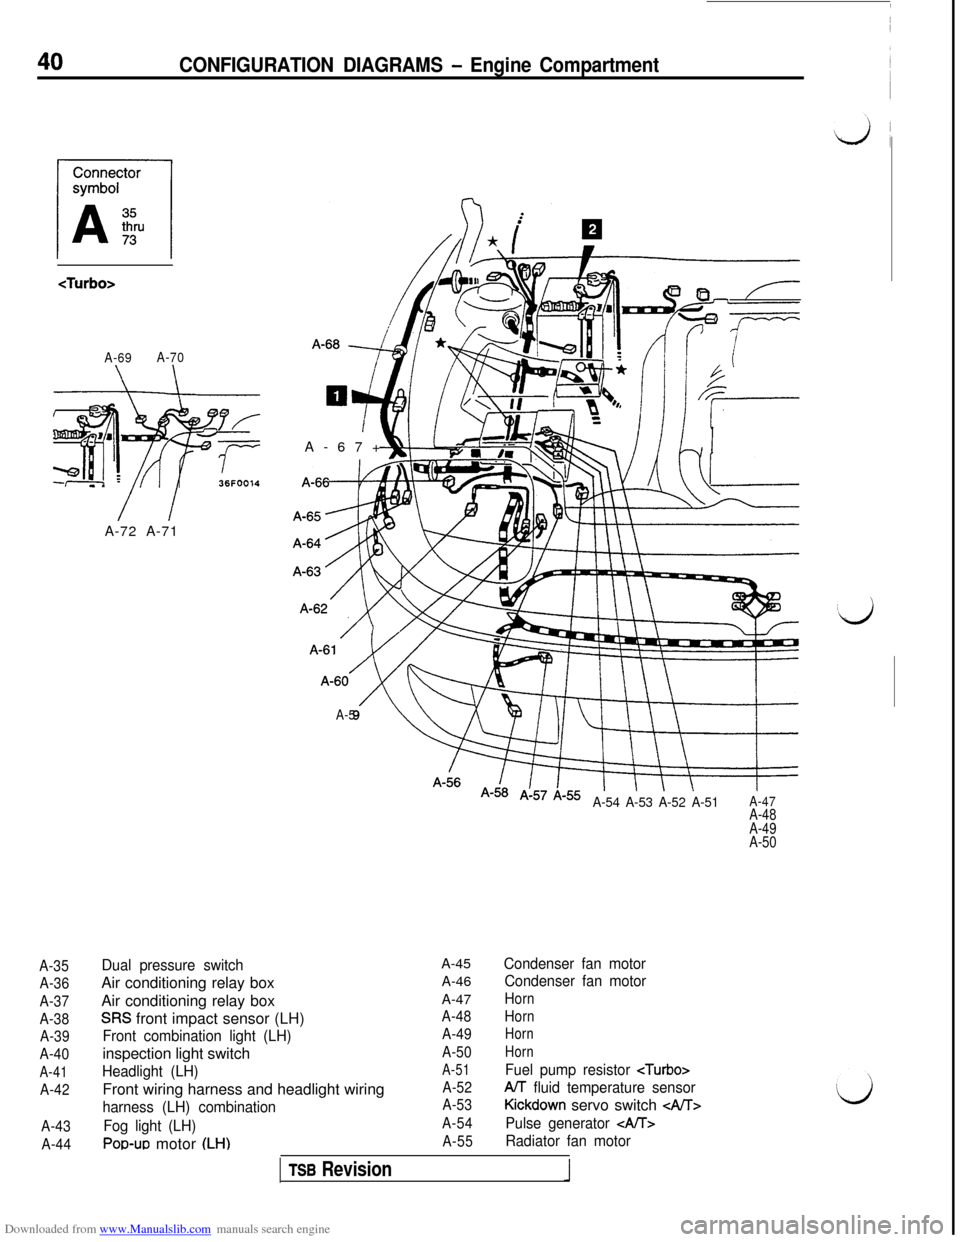 MITSUBISHI 3000GT 1992 2.G Service Manual Downloaded from www.Manualslib.com manuals search engine CONFIGURATION DIAGRAMS - Engine Compartment
<Turbo>
A-69A-70
\ \
36FOO14
A-35
A-36
A-37
A-38
A-39
A-40
A-41
A-42
A-43
A-44A-72 A-71A-67+
A-5
A-